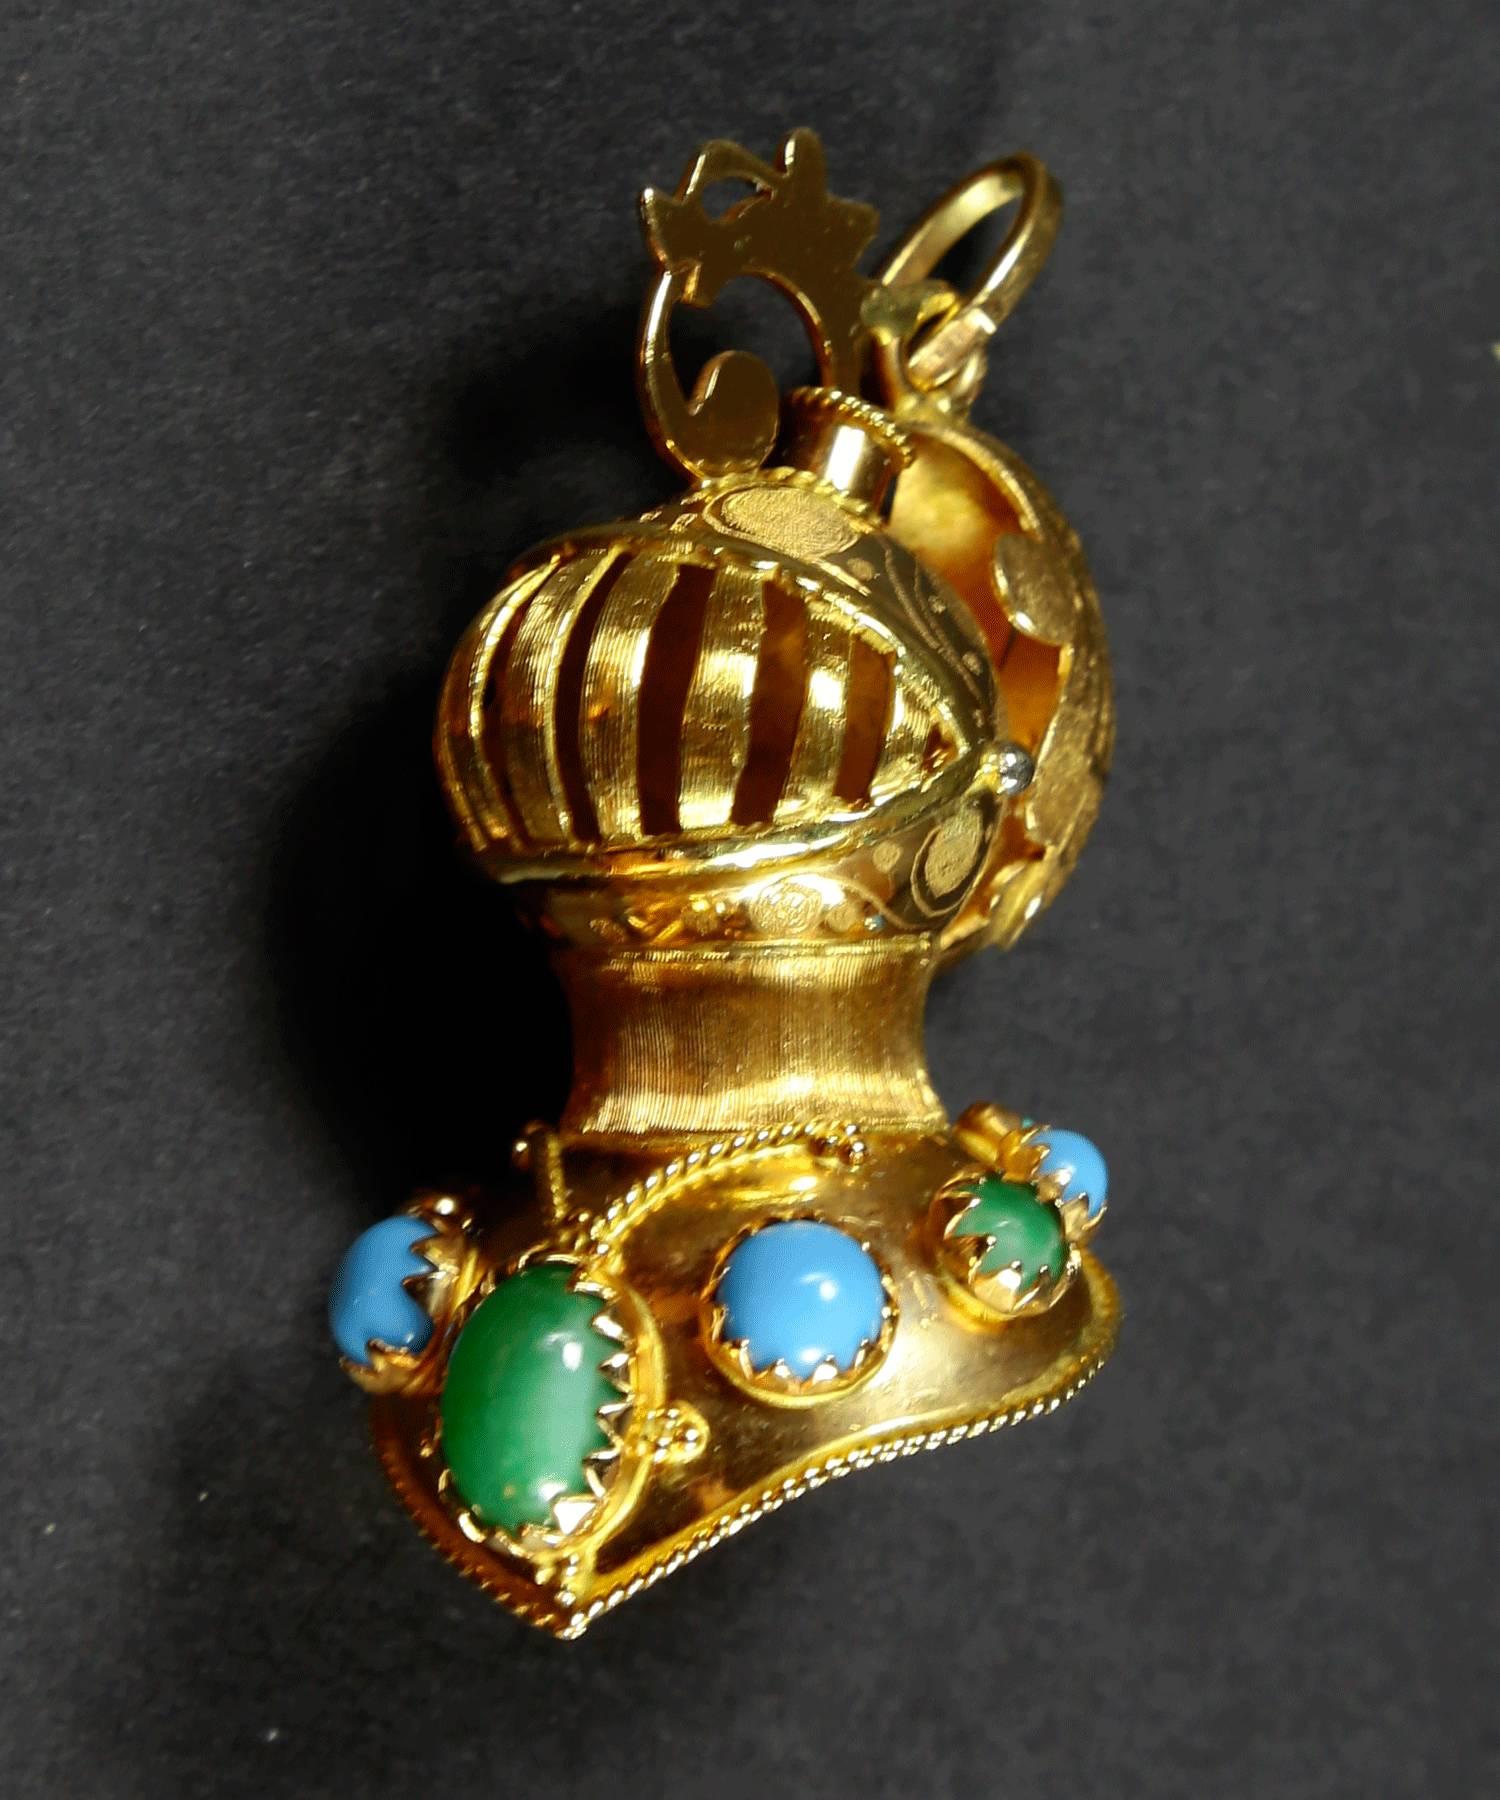  Full Helmet Gold Charm Pendant set with Turquoise stones; hand chased and crafted in 18k yellow gold; marked: 18K AR; measuring approx. 1.5” high.
